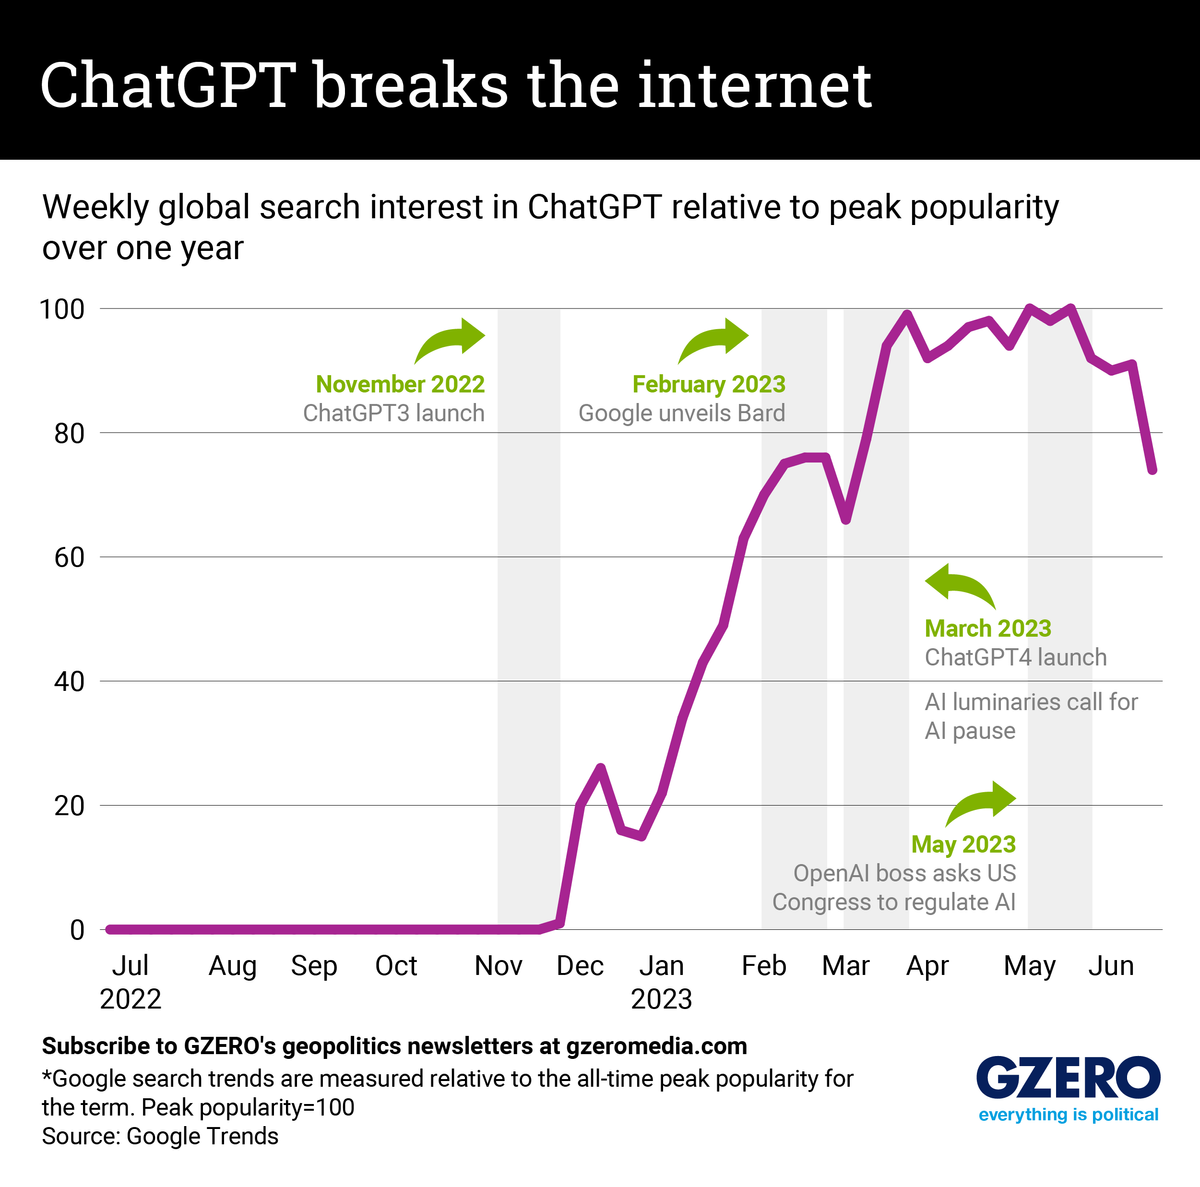 The Graphic Truth: ChatGPT breaks the internet